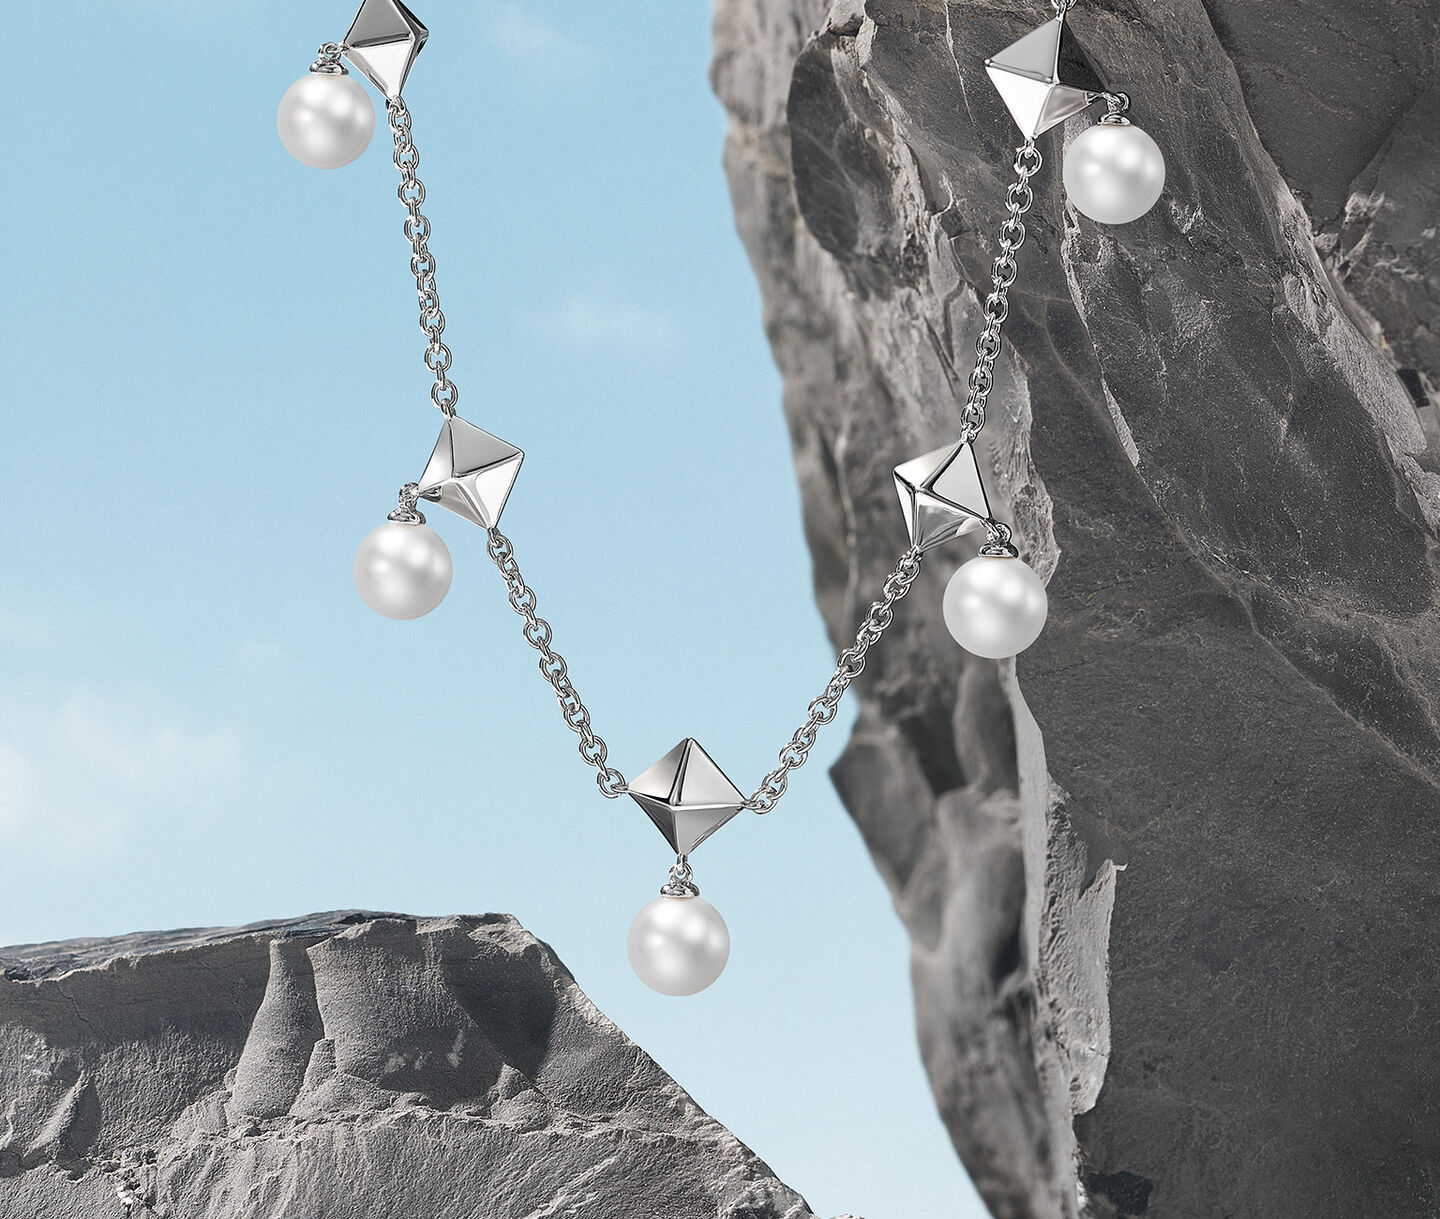 Birks Rock & Pearl silver and pearl necklace hanging off a rock.